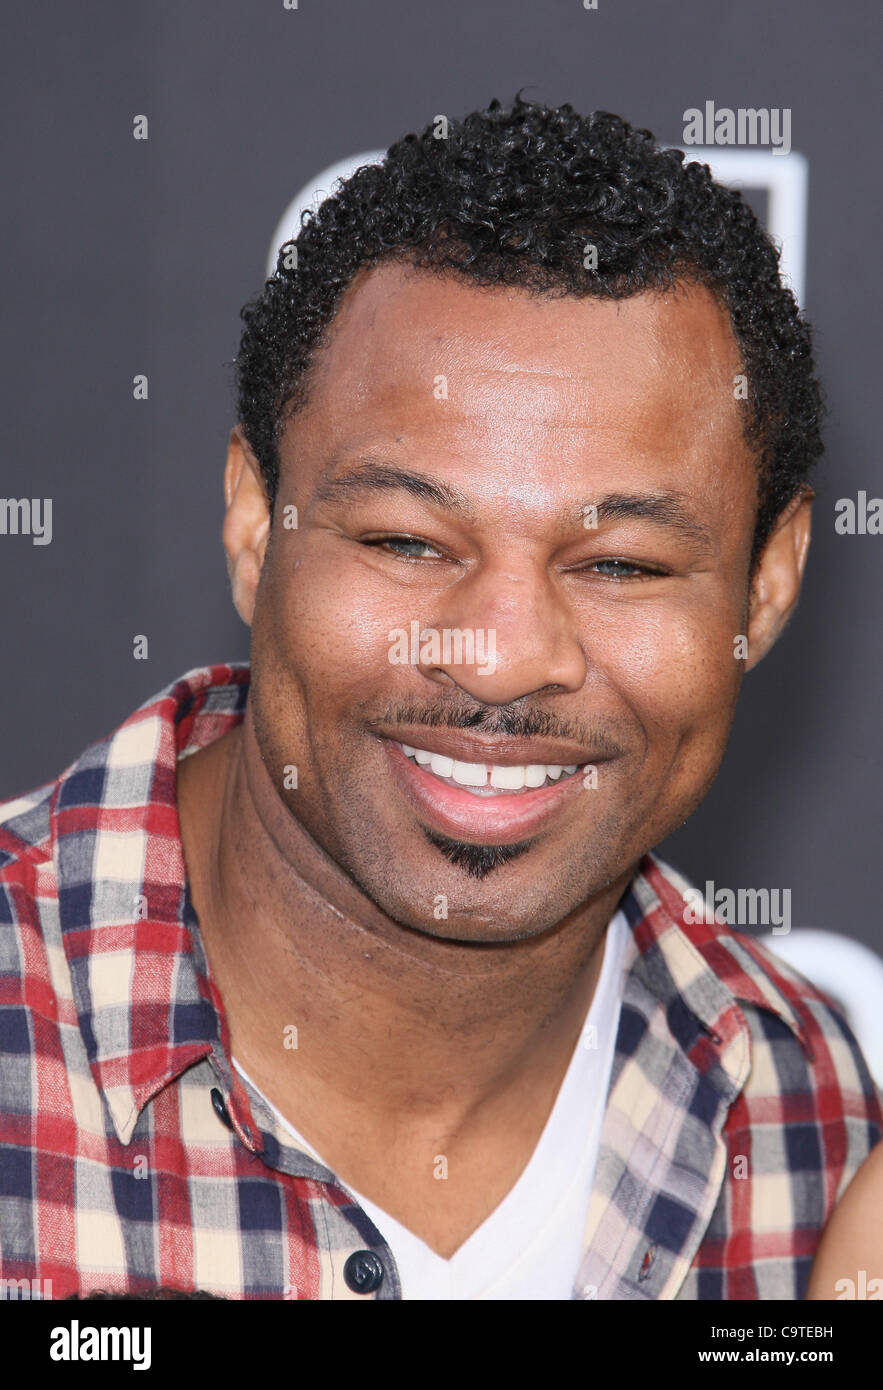 Sugar shane mosley hi-res stock photography and images picture